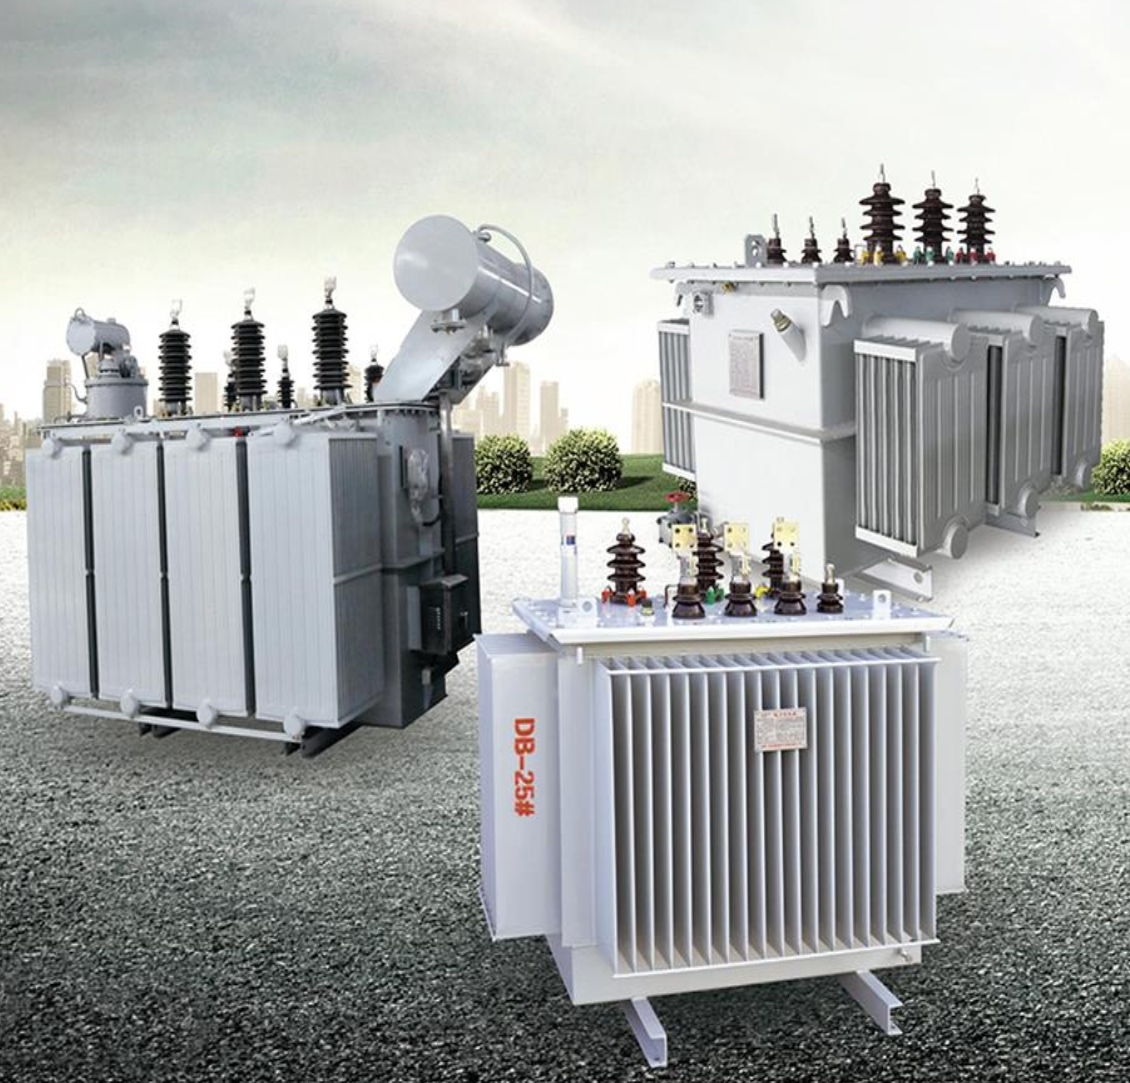 How to confirm the oil type transformer safety? Answered by a transformer manufacture in China-SPL- power transformer,electrical transformer,Combined compact substation,Metalclad AC Enclosed Switchgear,Low Voltage Switchgear,Indoor AC Metal Clad Intermediate Switchgear,Non-encapsulated Dry-type Power Transformer,Unwrapped coil dry-type transformer,Epoxy resin cast silicon steel sheet dry-type transformer,Epoxy resin cast amorphous alloy dry-type transformer,Amorphous alloy oil-immersed power transformer,Silicon steel sheet oil-immersed power,electric transformer,Distribution Transformer,voltage transformer,step-down transformer,reducing transformer,low-loss power transformer,loss power transformer,Oil-type Transformer,Oil Distribution Transformer,Transformer-Oil-lmmersed,Oil Transformer,Oil Immersed Transformer,three phase oil immersed power transformer,oil filled electrical transformer,Sealed amorphous alloy power transformer,Dry Type Transformer,dry Transformer,Cast Resin Dry Type Transformer,dry-type transformer,resin-casting type transformer,resinated dry type transformer,CRDT,Unwrapped coil power transformer,three phase dry Transformer,articulated unit substation,AS,Modular substation,transformer substation,electric substation,Power Sub-station,Preinstalled substation,YBM,prefabricated substation,Distribution Substation,compact substation,MV power stations,LV power stations,HV power stations,Switchgear Cabinet,MV Switchgear Cabinet,LV Switchgear Cabinet,HV Switchgear Cabinet,pull-out switch cabinet,Ac metal closed ring network switchgear,Indoor metal armored central switchgear,Box-type substation,custom transformers,customized transformers,Metal enclosed electrical switchgear,LV Switchgear Cabinet,